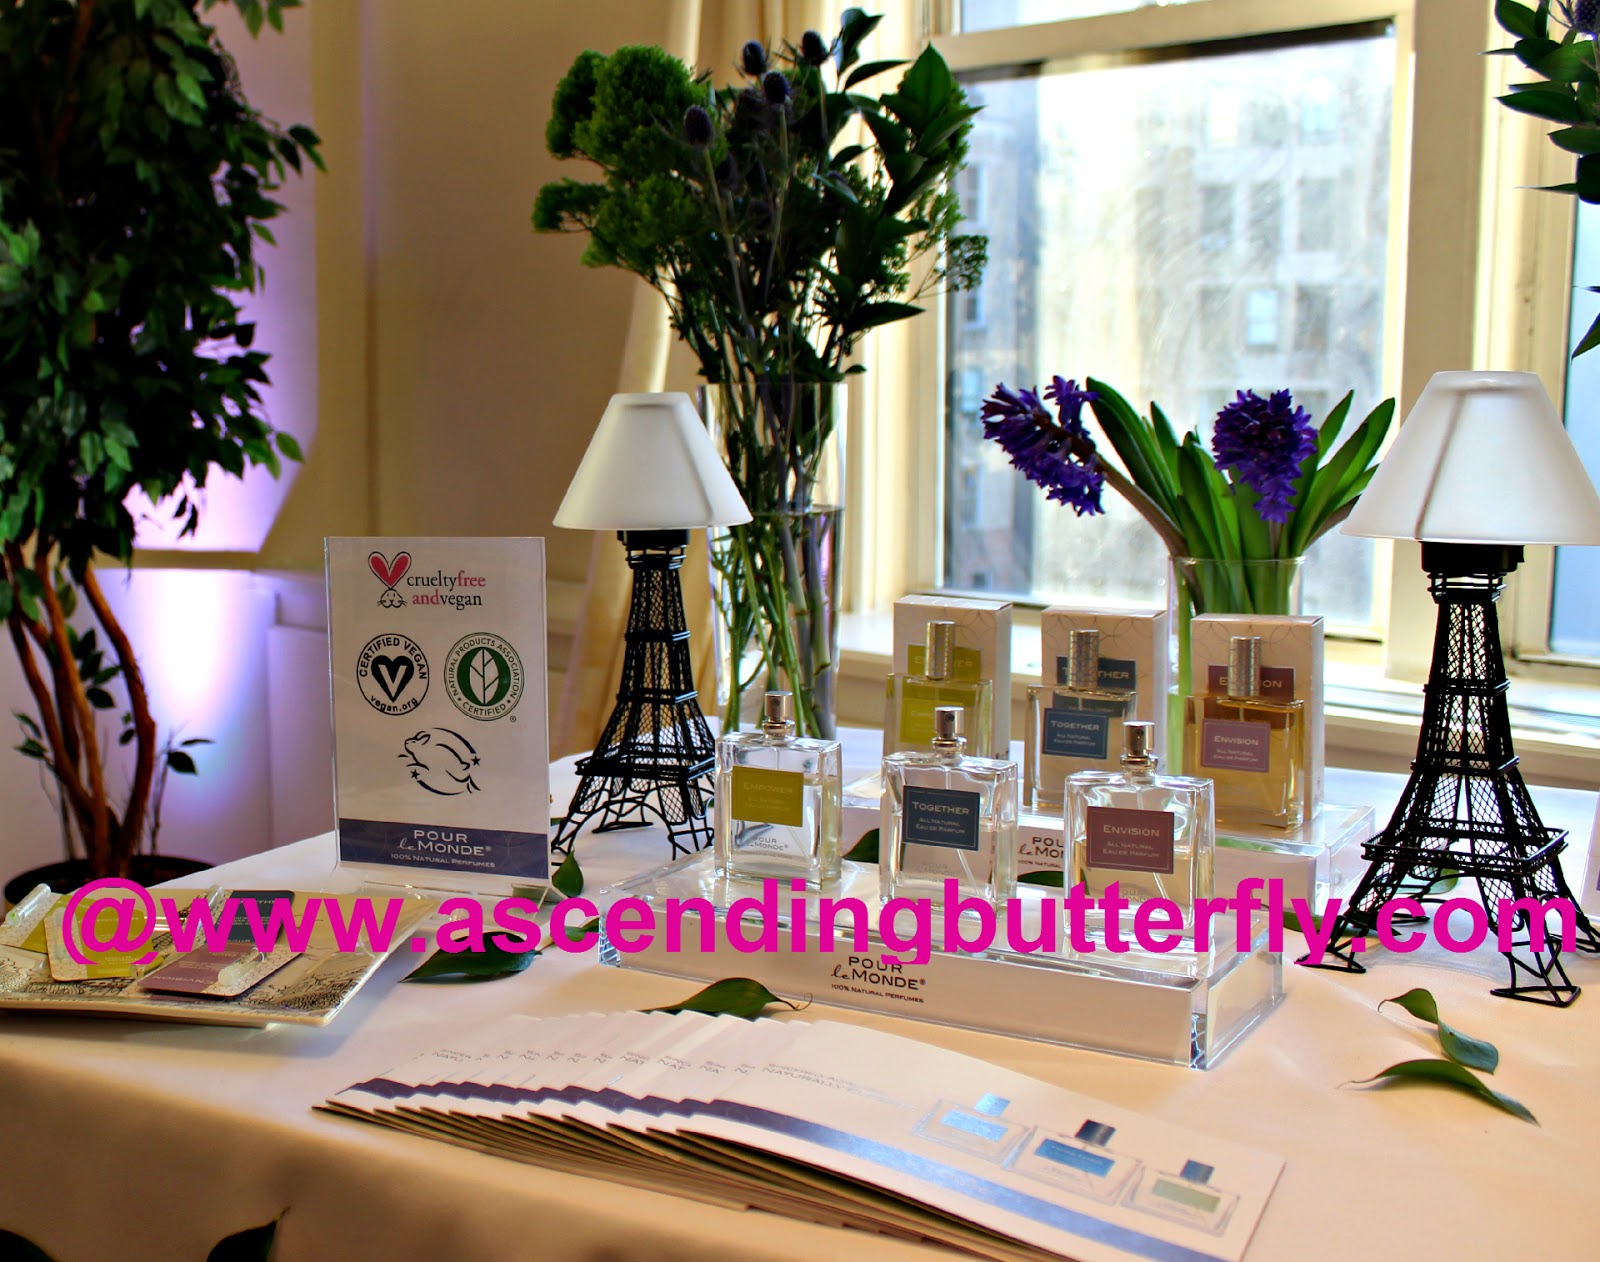 Pour le Monde Parfums at BeautyPress Spotlight Day February 2015, Certified 100% Natural Prestige Fragrance